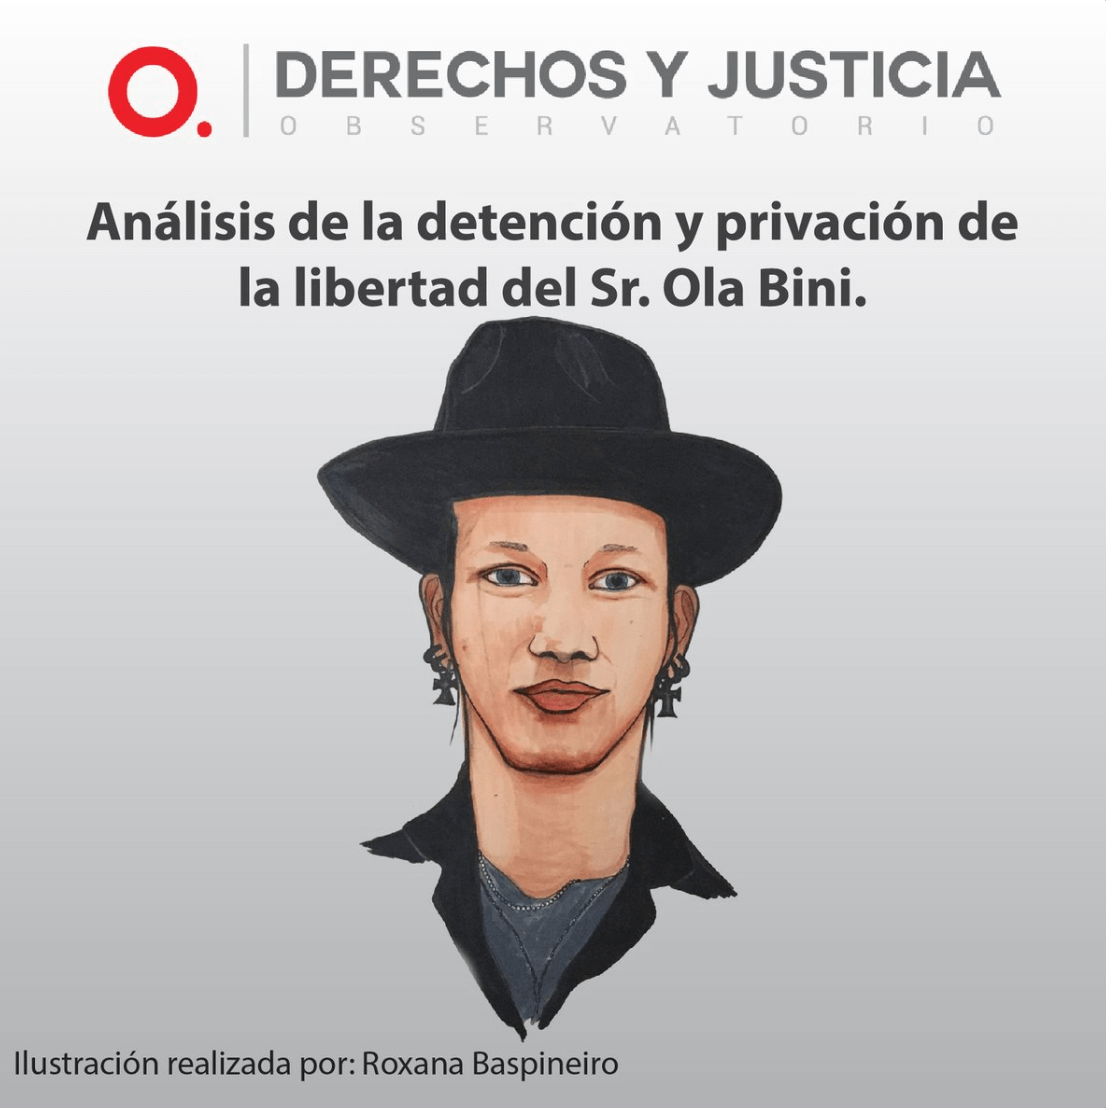 Analysis of the detention and deprivation of liberty of Ola Bini by the Observatorio de Derechos y Justicia